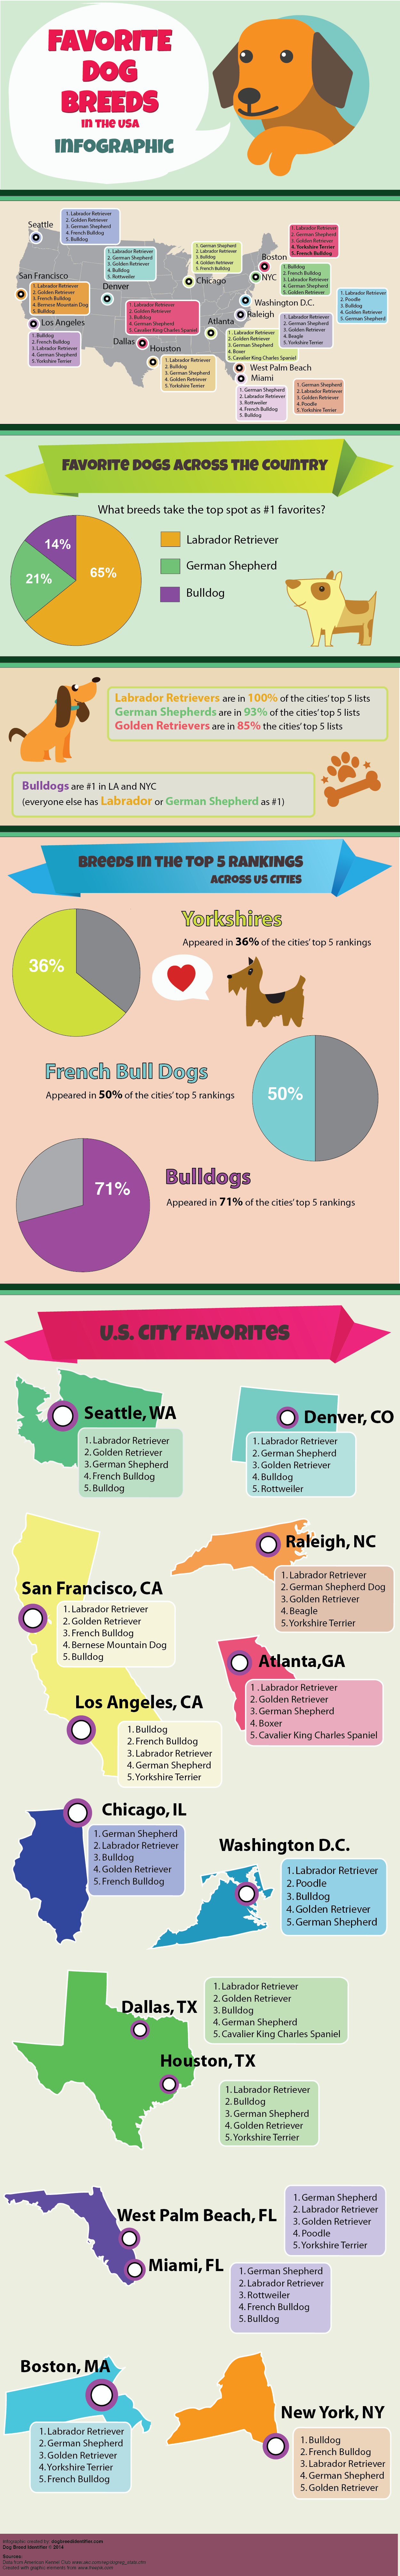 Top Dog Breeds in the USA Infographic